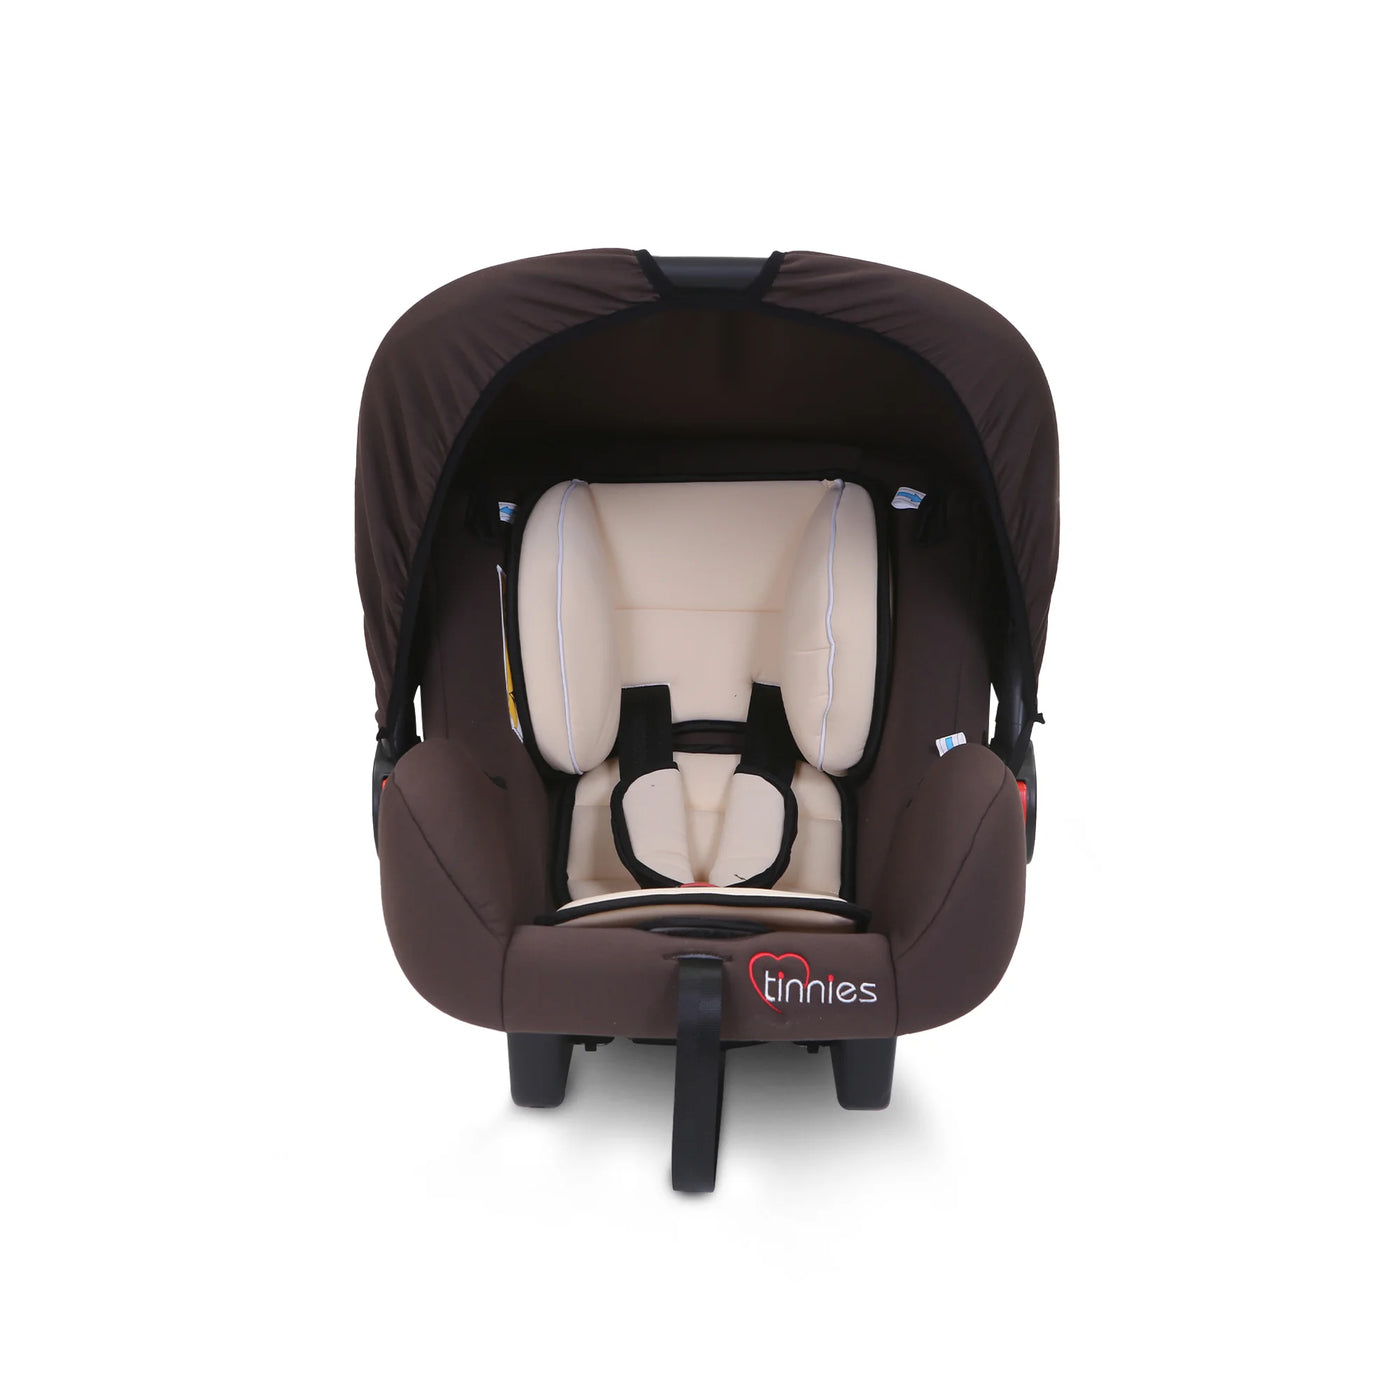 Tinnies Baby Carry Cot-Brown T001 E-C